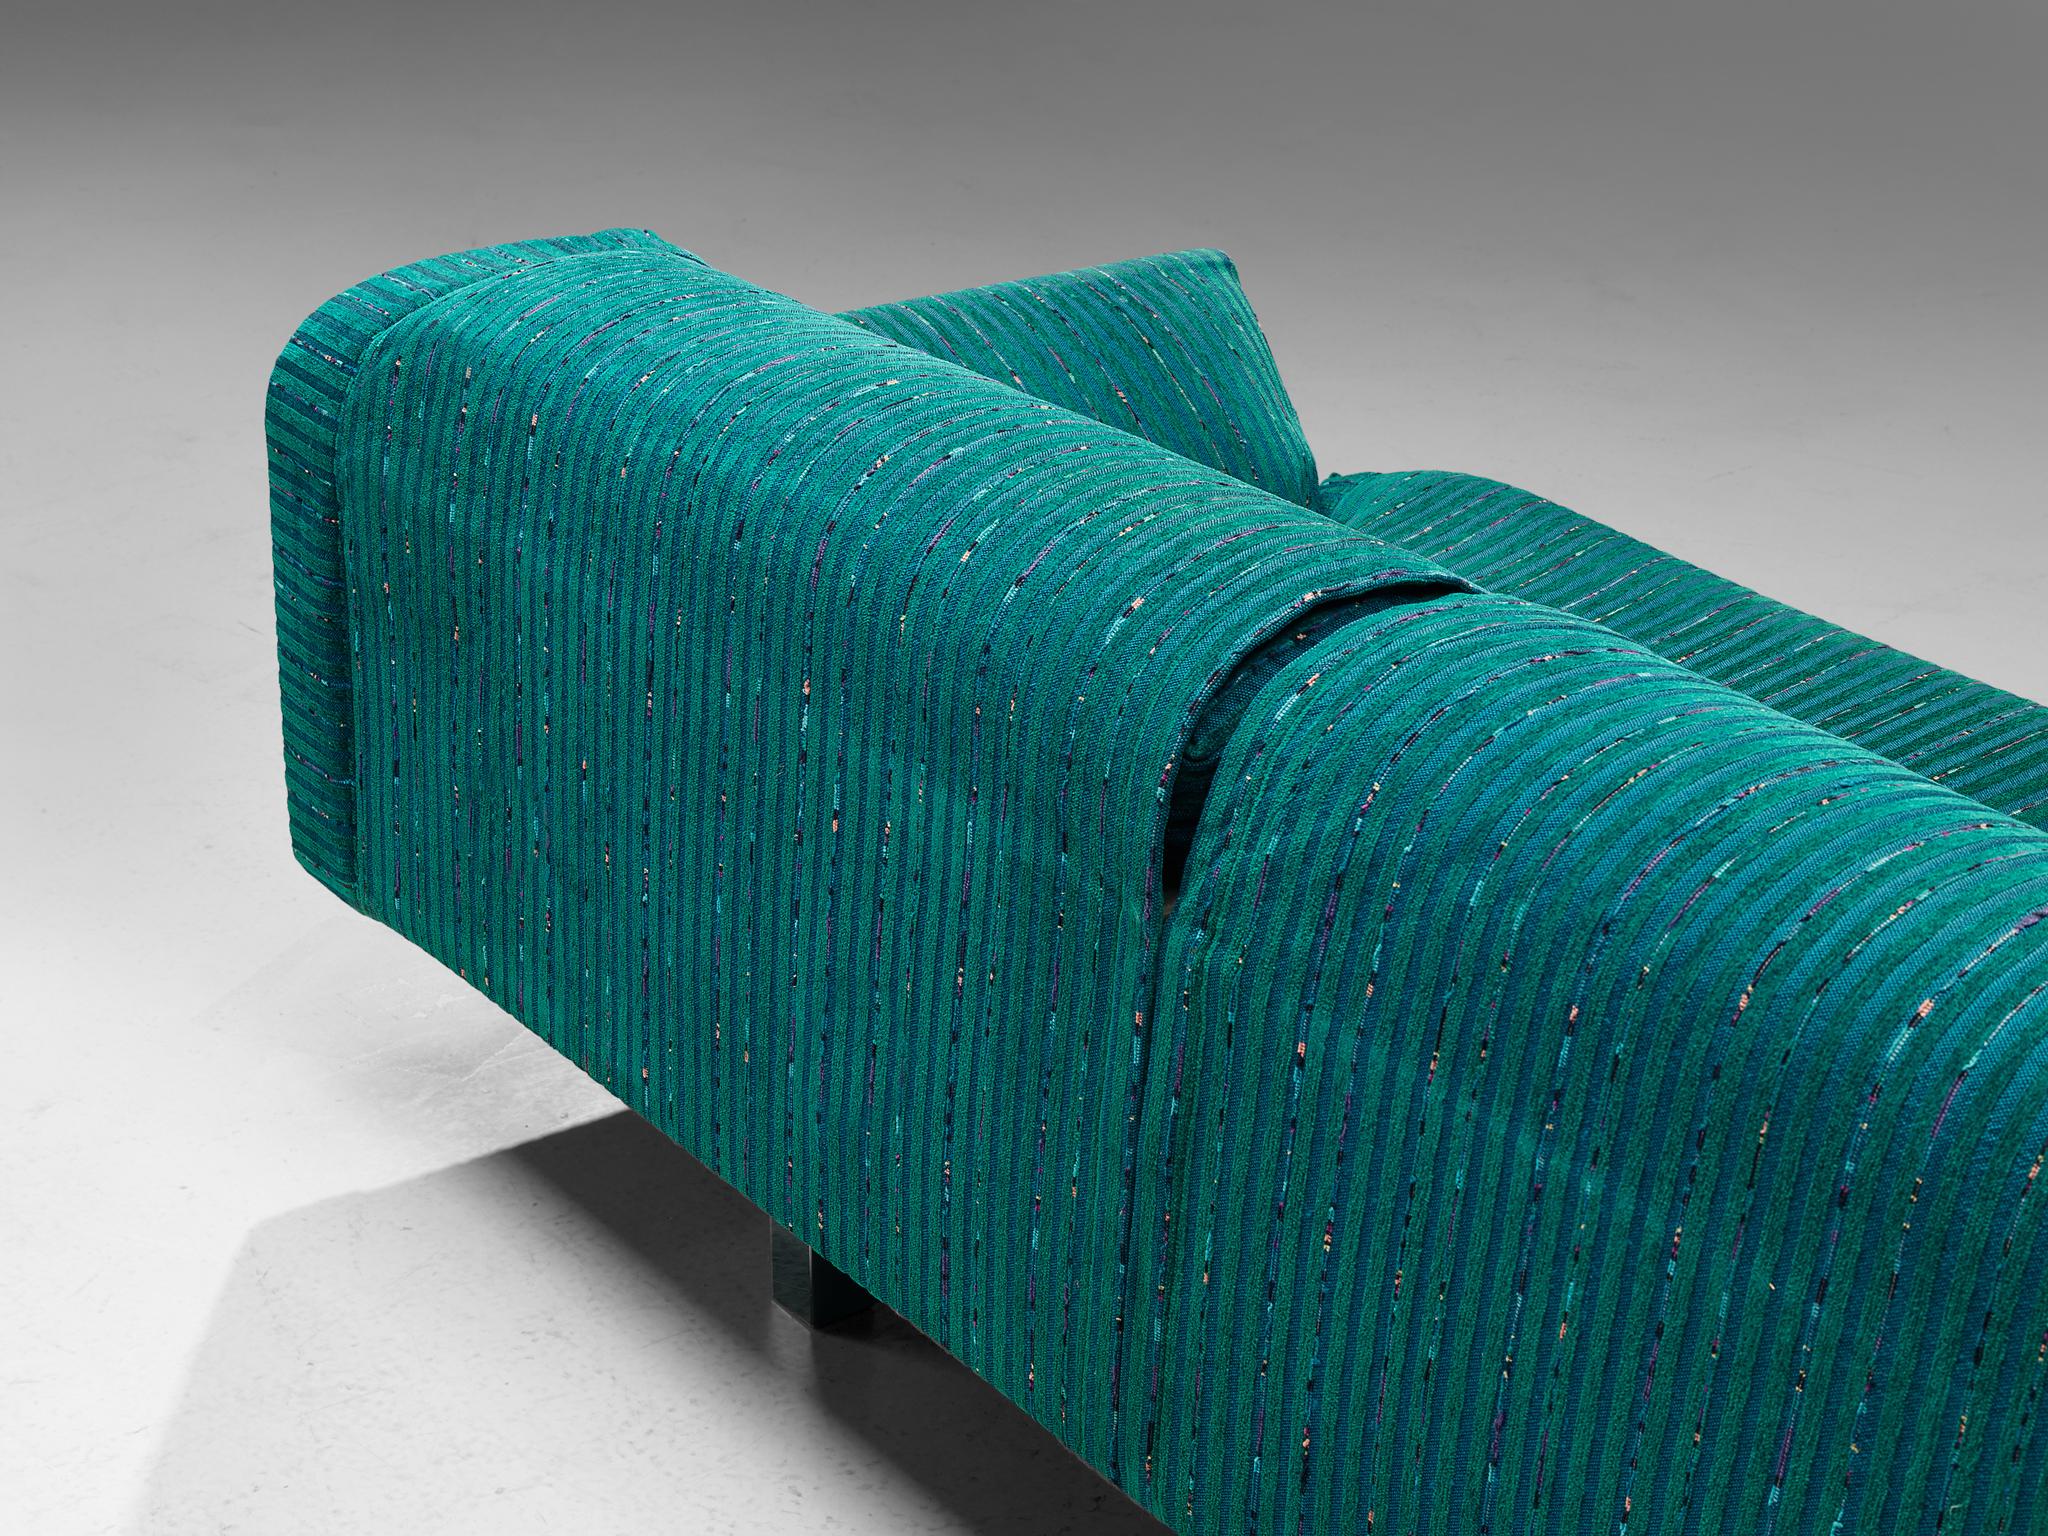 Saporiti Large Sofa in Structured Turquoise Upholstery  In Good Condition For Sale In Waalwijk, NL